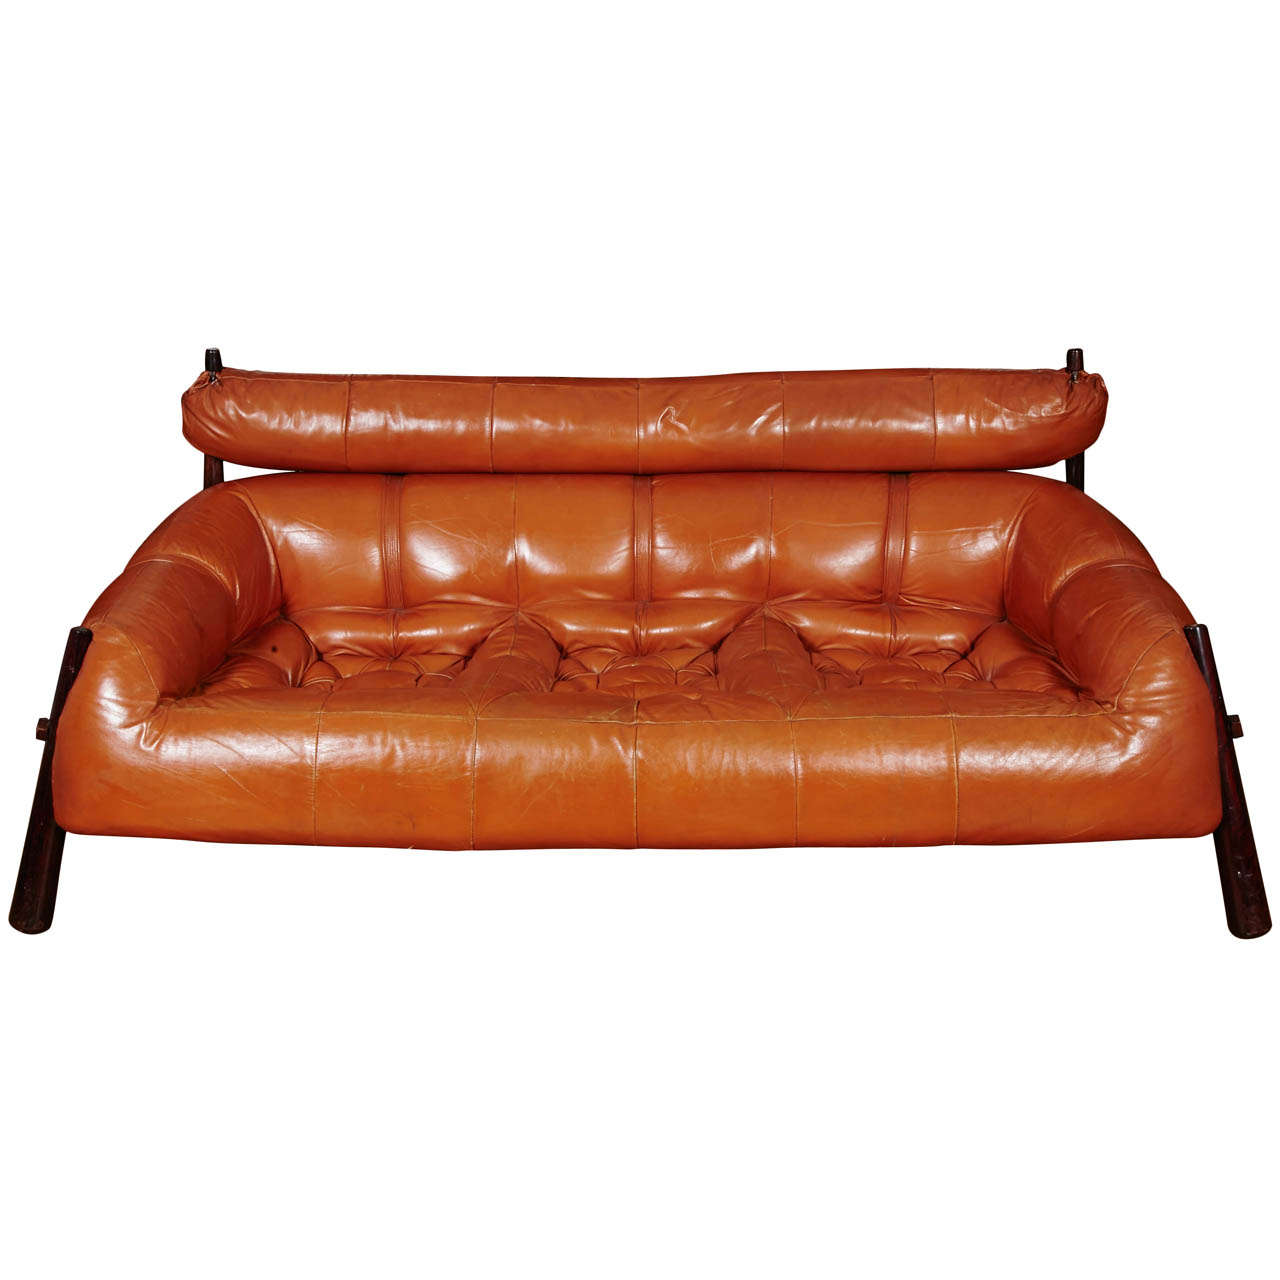 A Large Sofa by Percival Lafer, Brazil For Sale